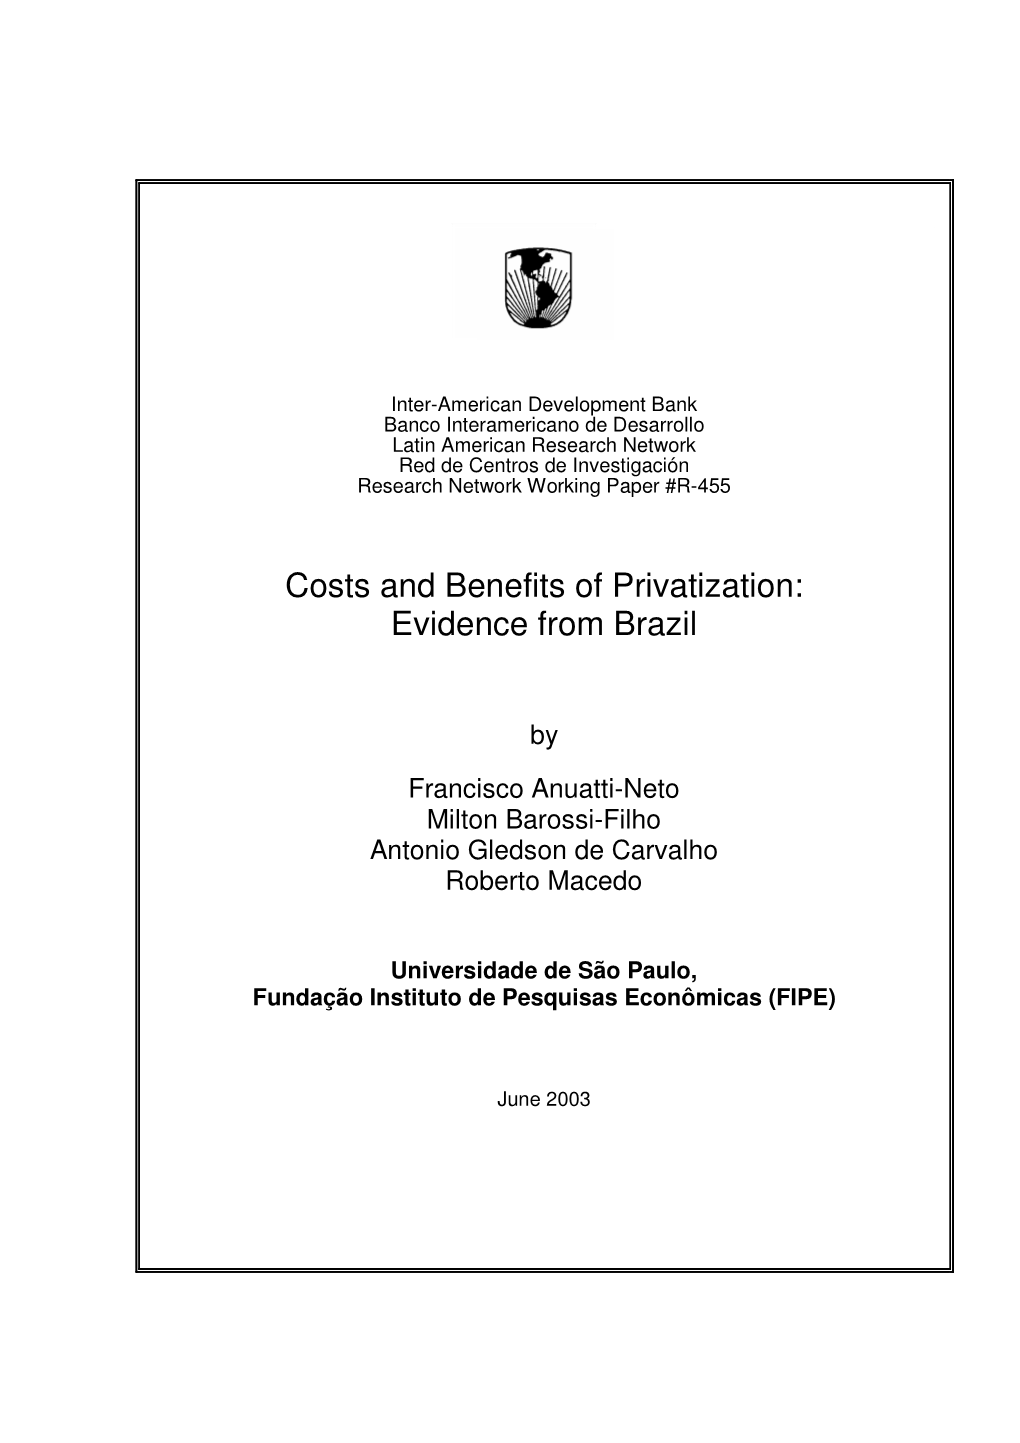 Costs and Benefits of Privatization: Evidence from Brazil